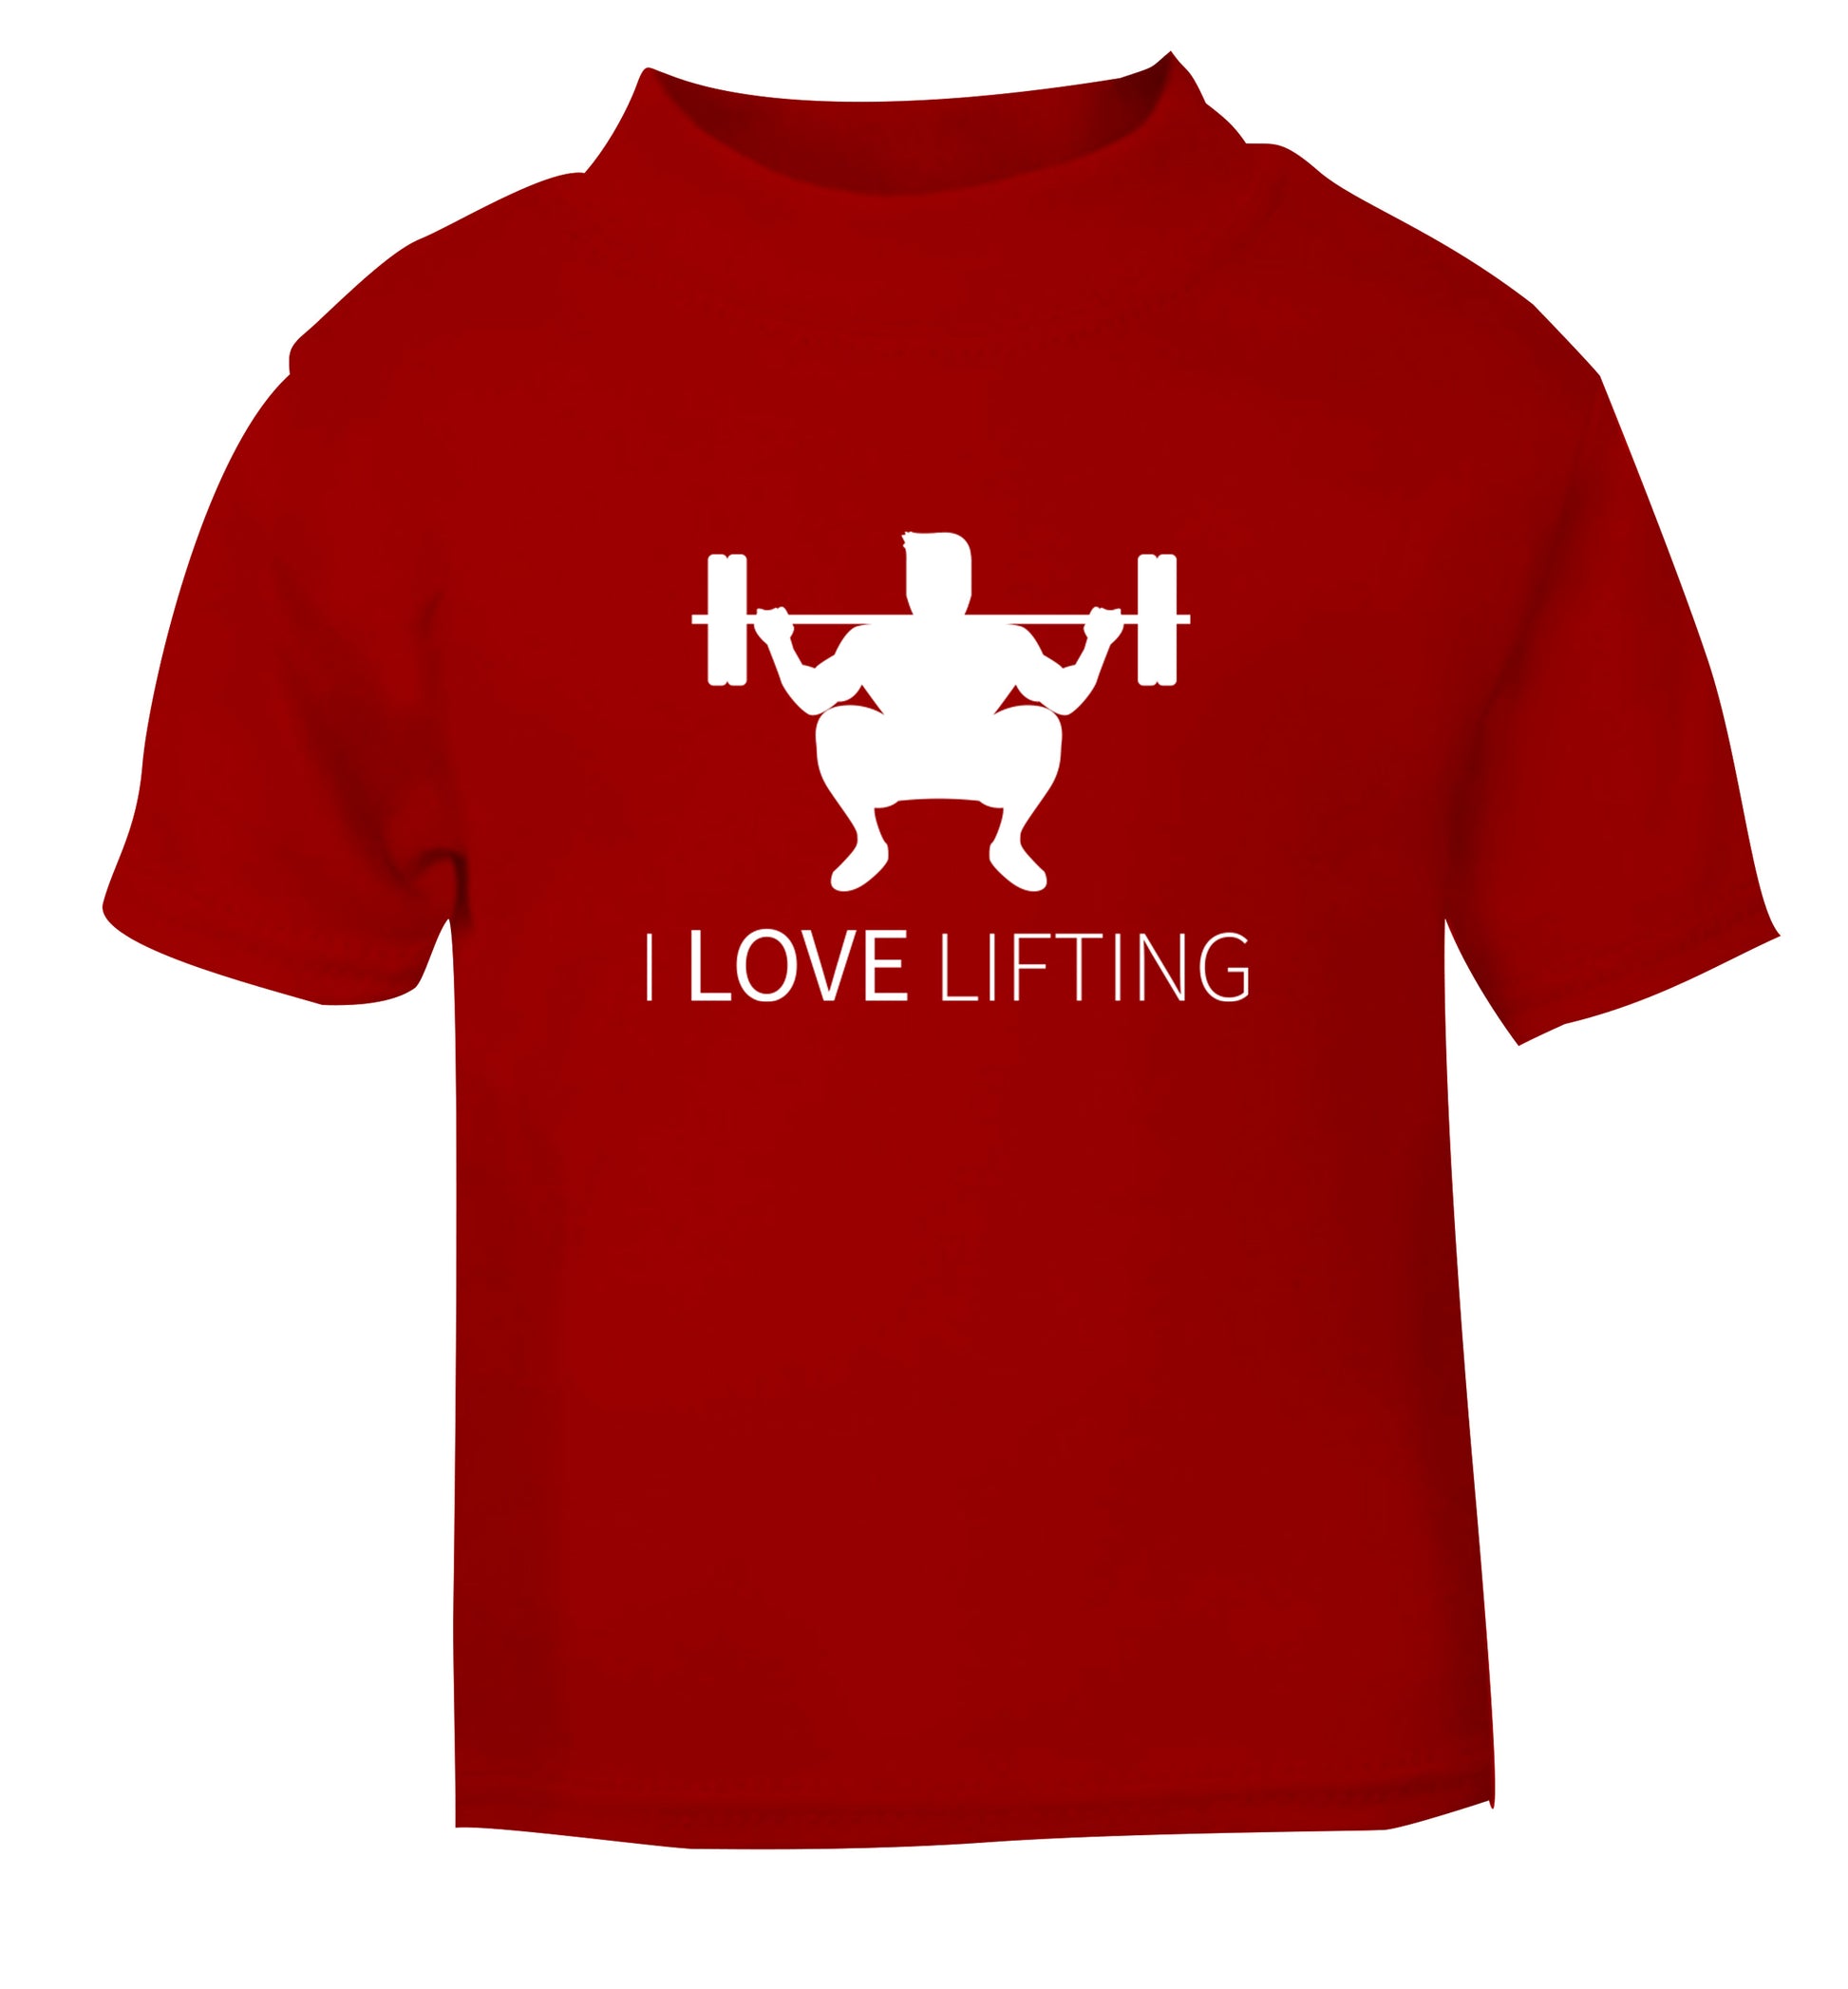 I Love Lifting red Baby Toddler Tshirt 2 Years